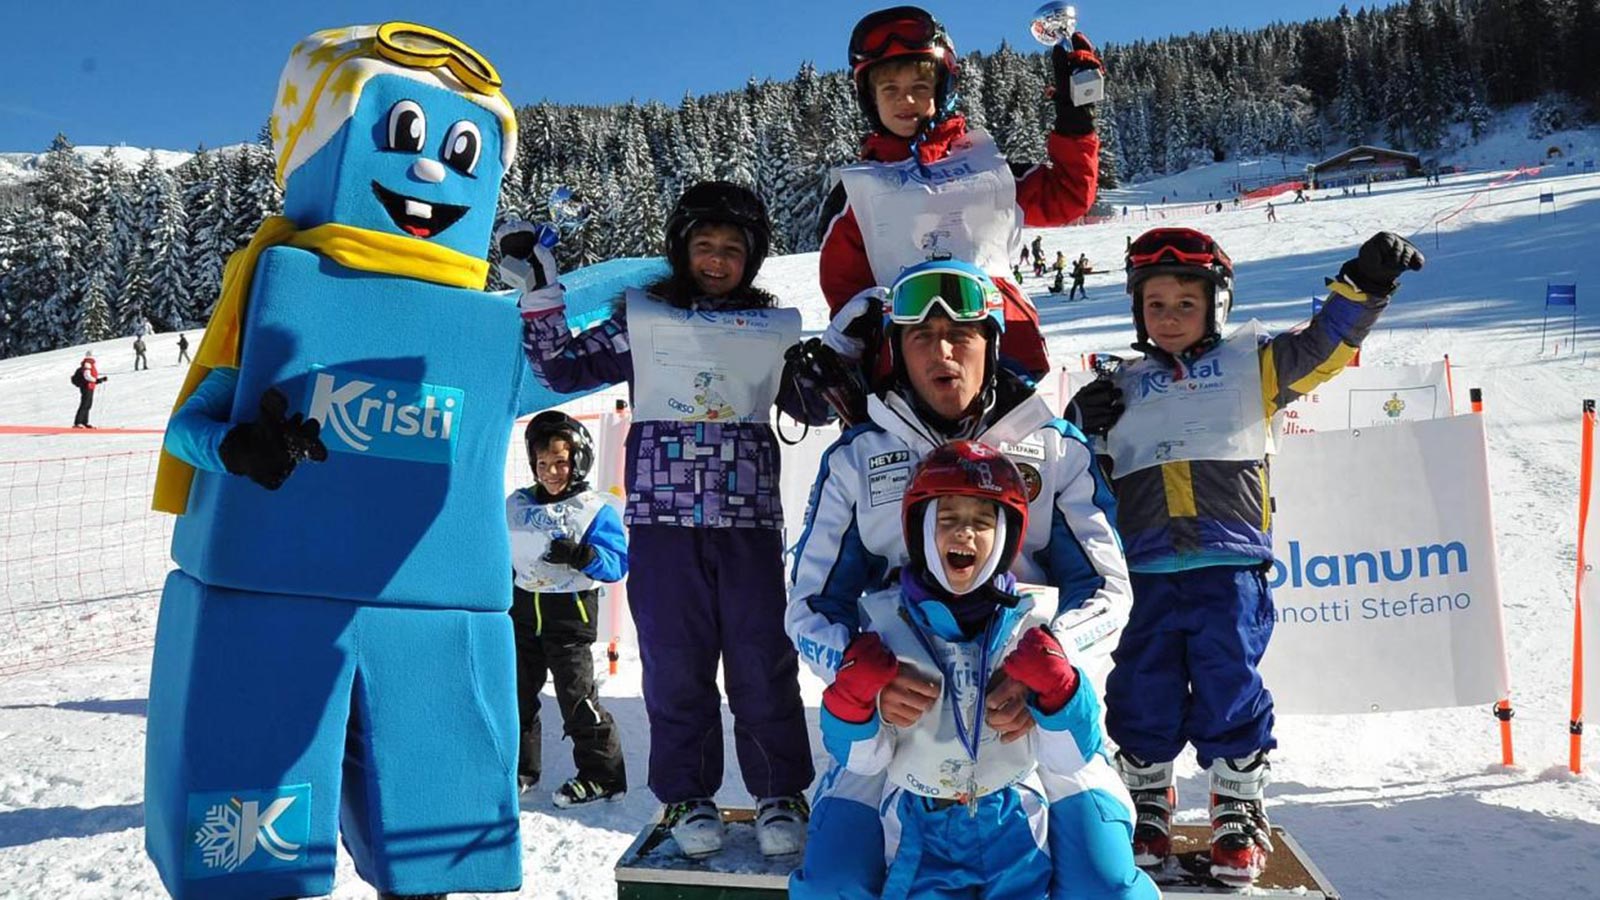 The ski school with Mascot Kristi near the Residence Antares in Andalo